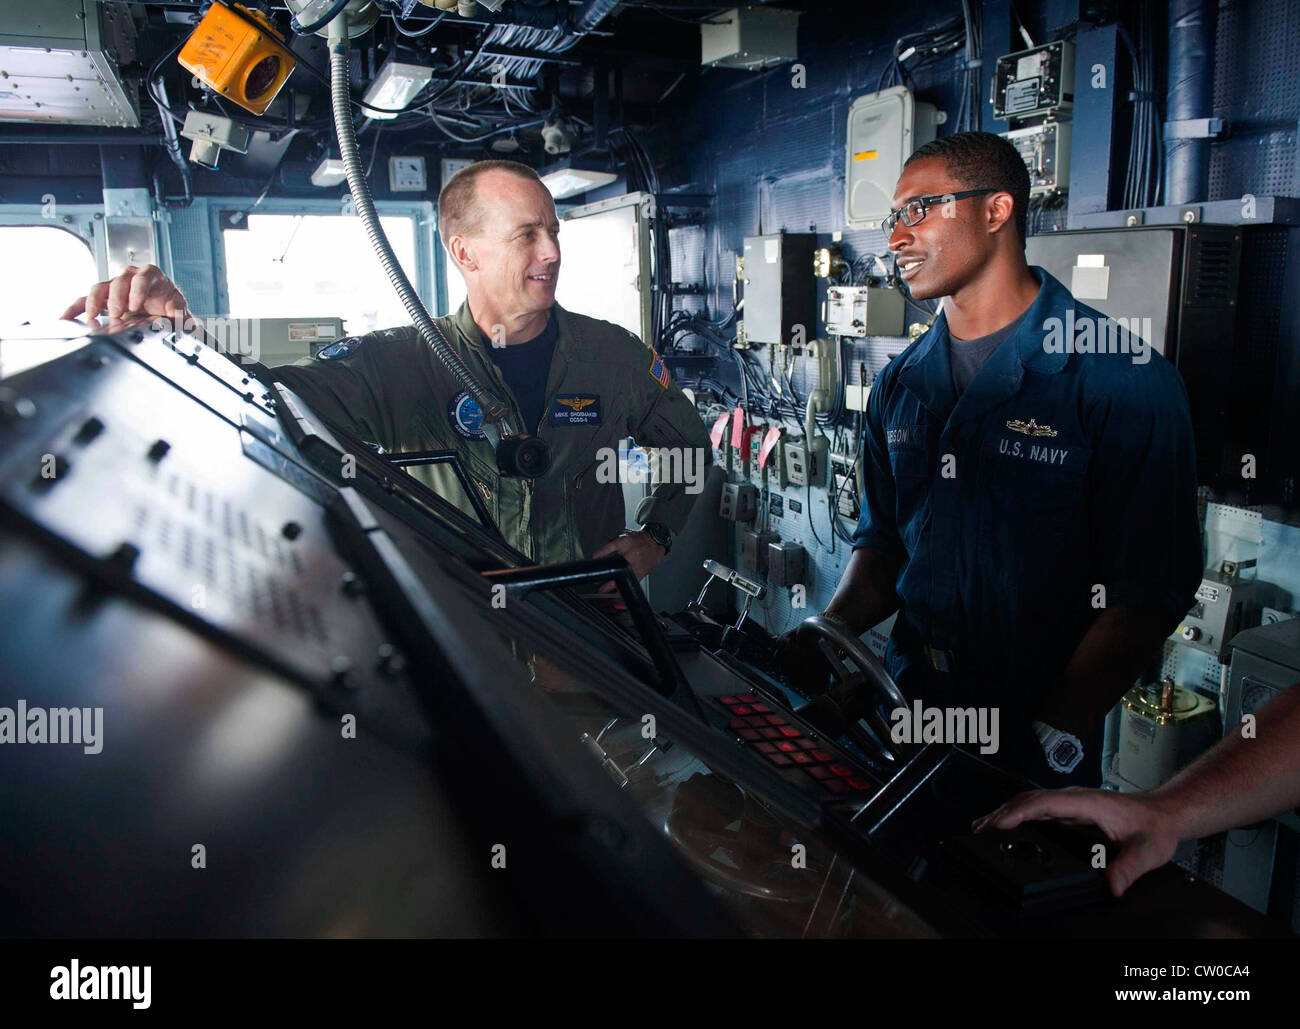 Rear Adm. Mike Shoemaker, commander of Carrier Strike Group (CSG) 9, speaks with Seaman Mark Gibson on the bridge of the Ticonderoga-class guided-missile cruiser USS Cape St. George (CG 71). Cape St. George is deployed as part of CSG 9, which is operating in the U.S. 6th Fleet area of responsibility in support of maritime security operations and theater security cooperation efforts. Stock Photo